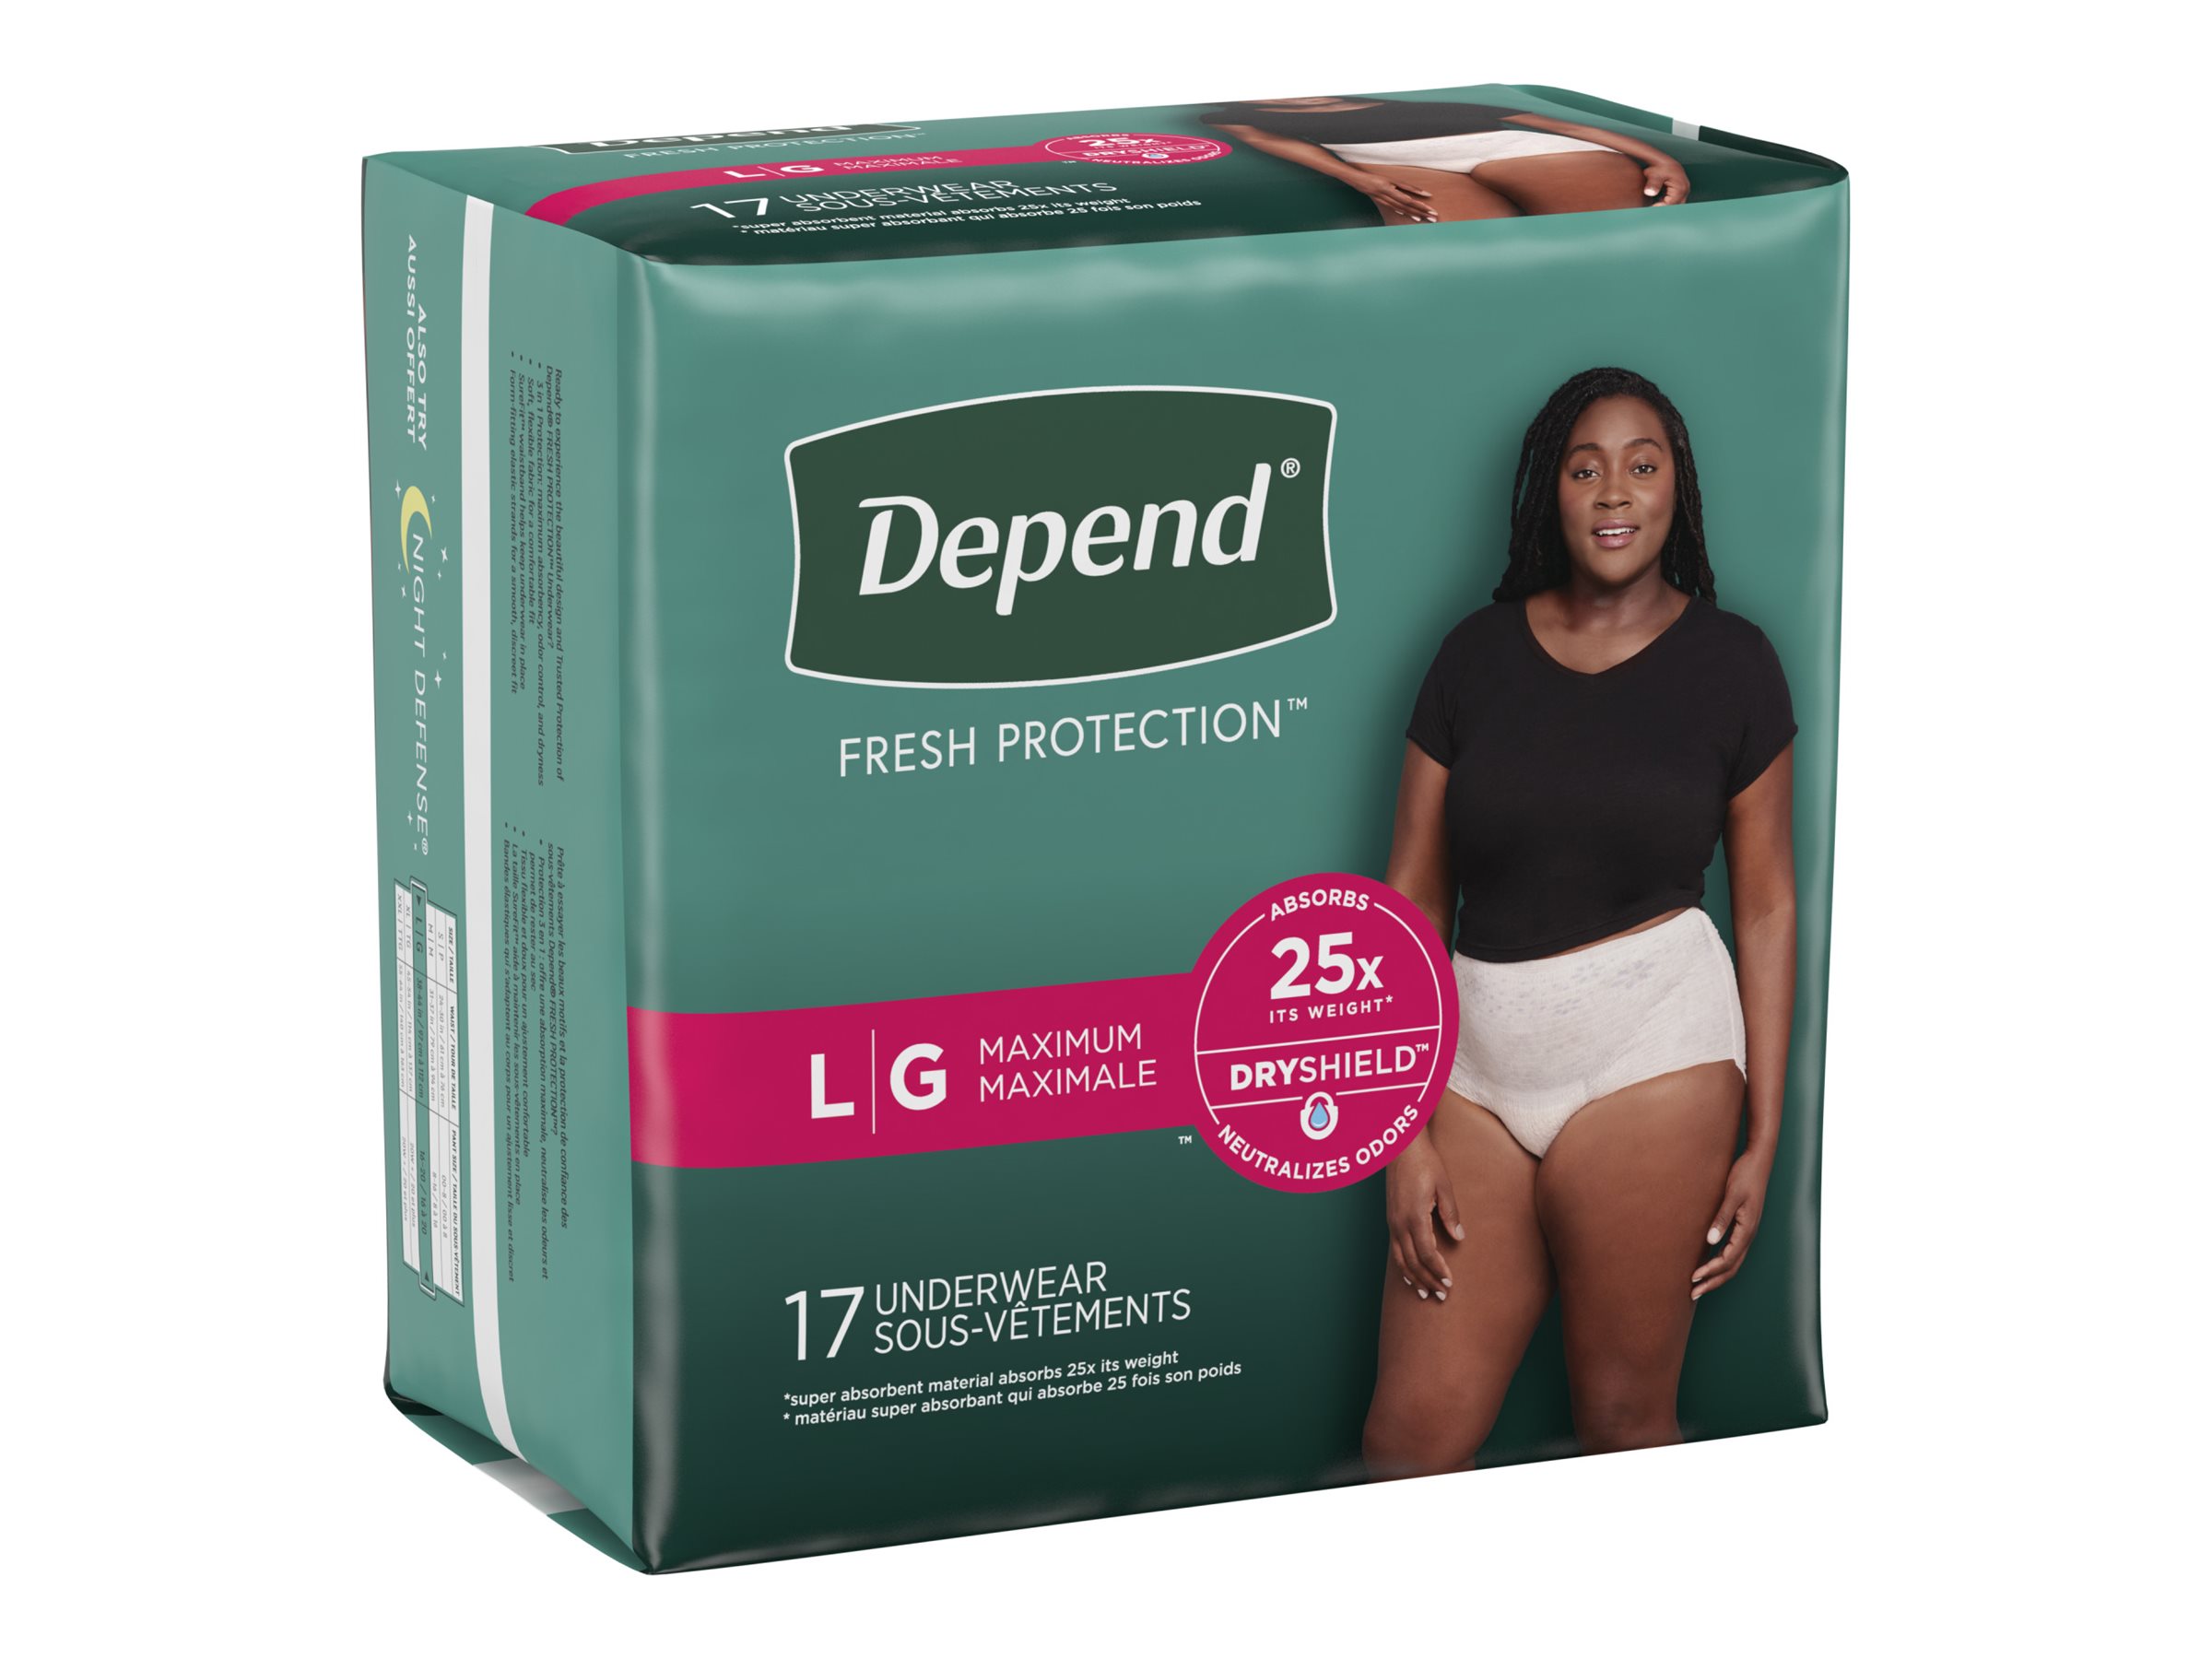 Finding Proper Fit for Incontinence Products Like Absorbent Briefs